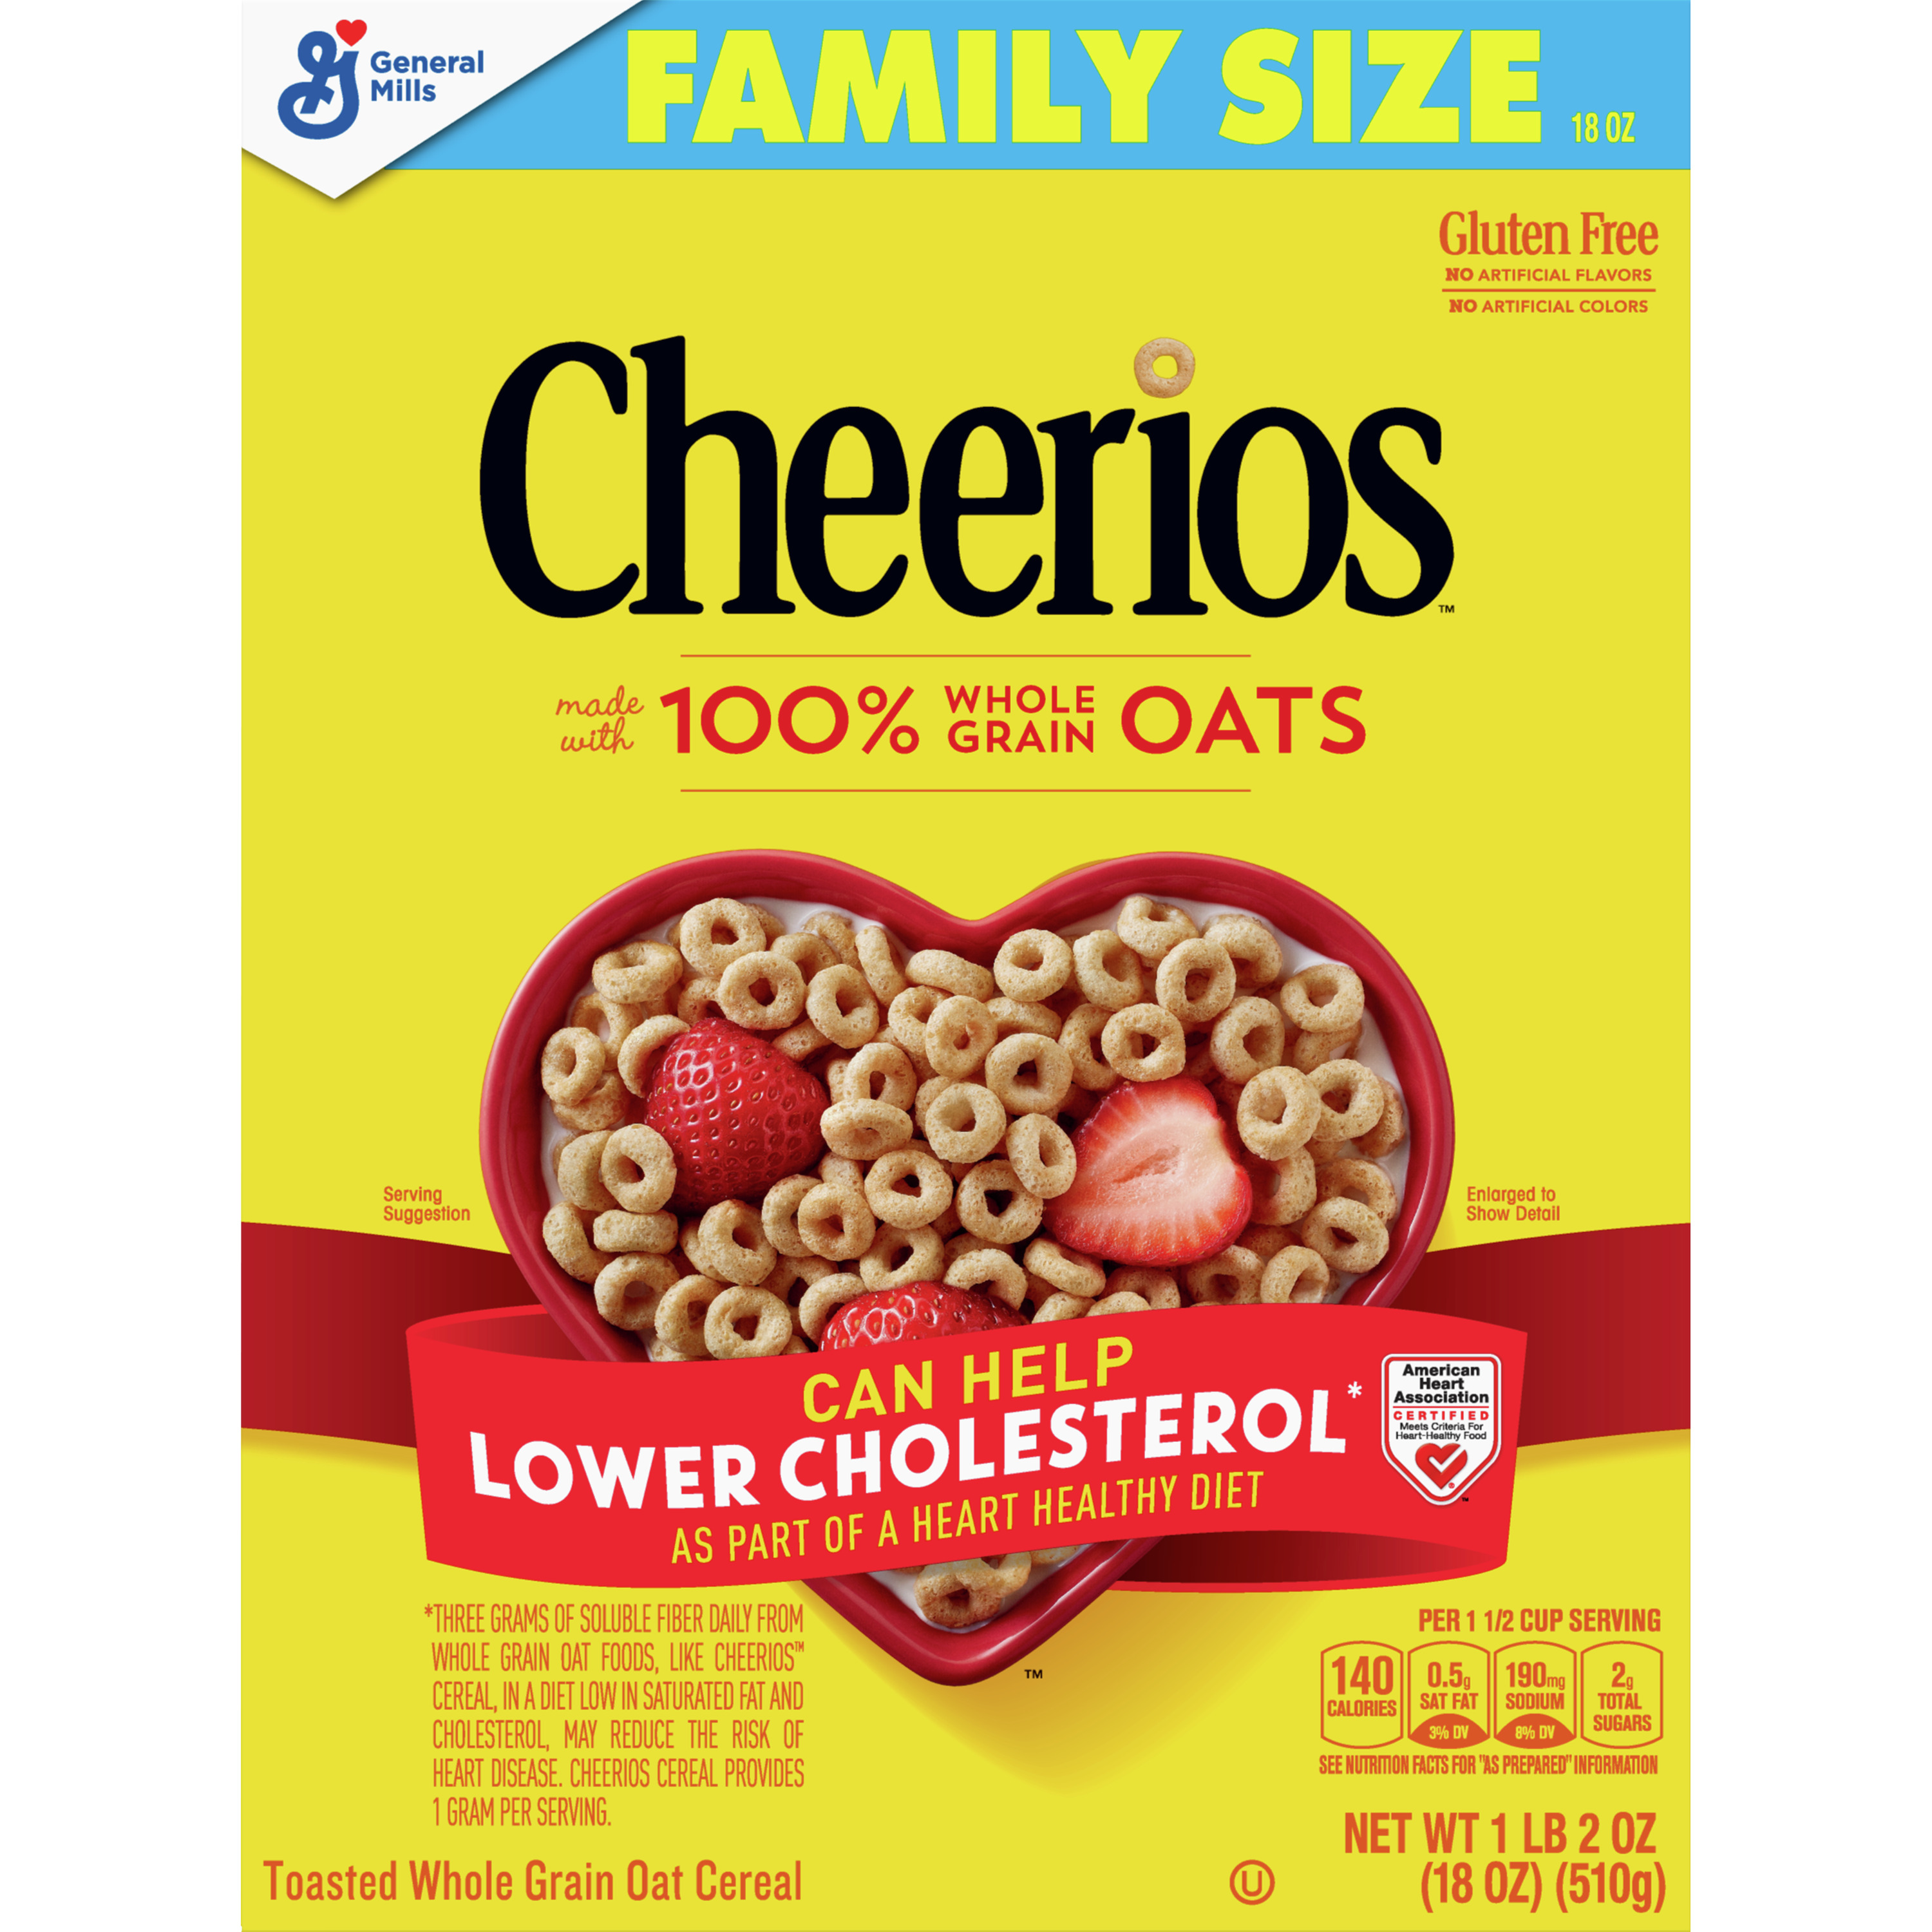 Original Cheerios Heart Healthy Cereal, 18 OZ Family Size Cereal Box - image 1 of 11